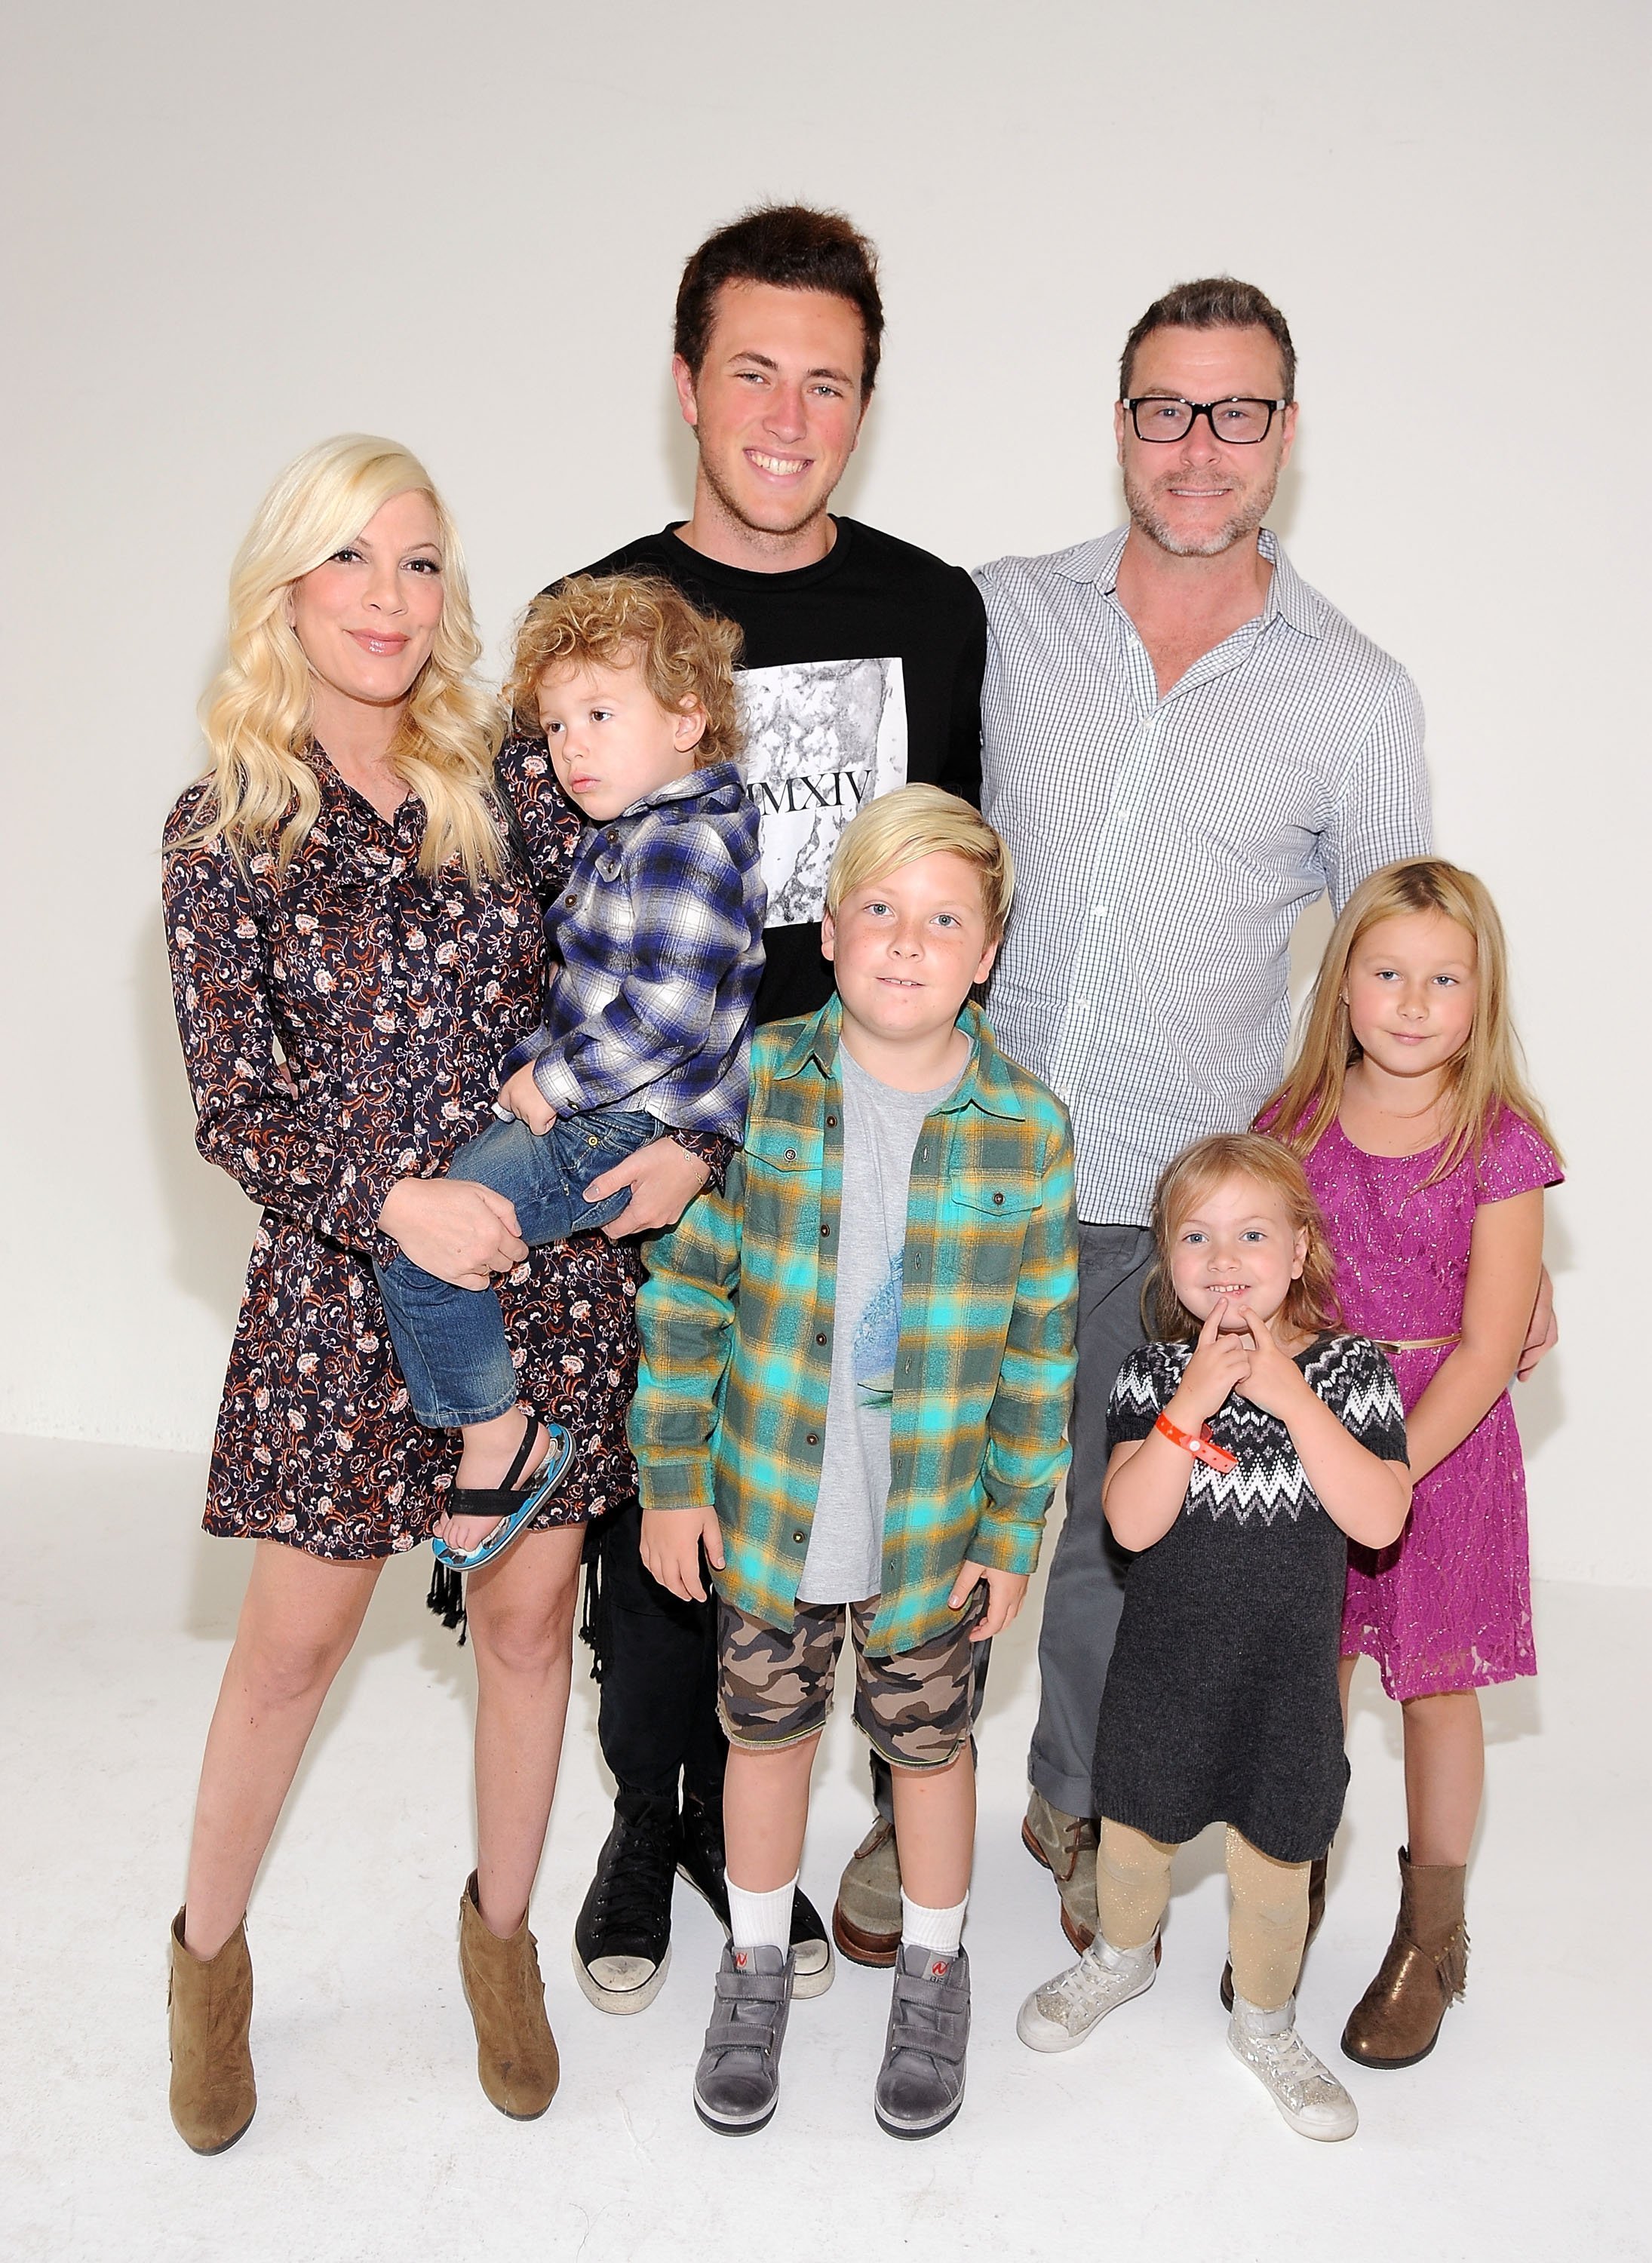 Tori Spelling and Dean McDermott with their children attend the Elizabeth Glaser Pediatric AIDS Foundation's 26th Annual A Time For Heroes Family Festival | Source: Getty Images